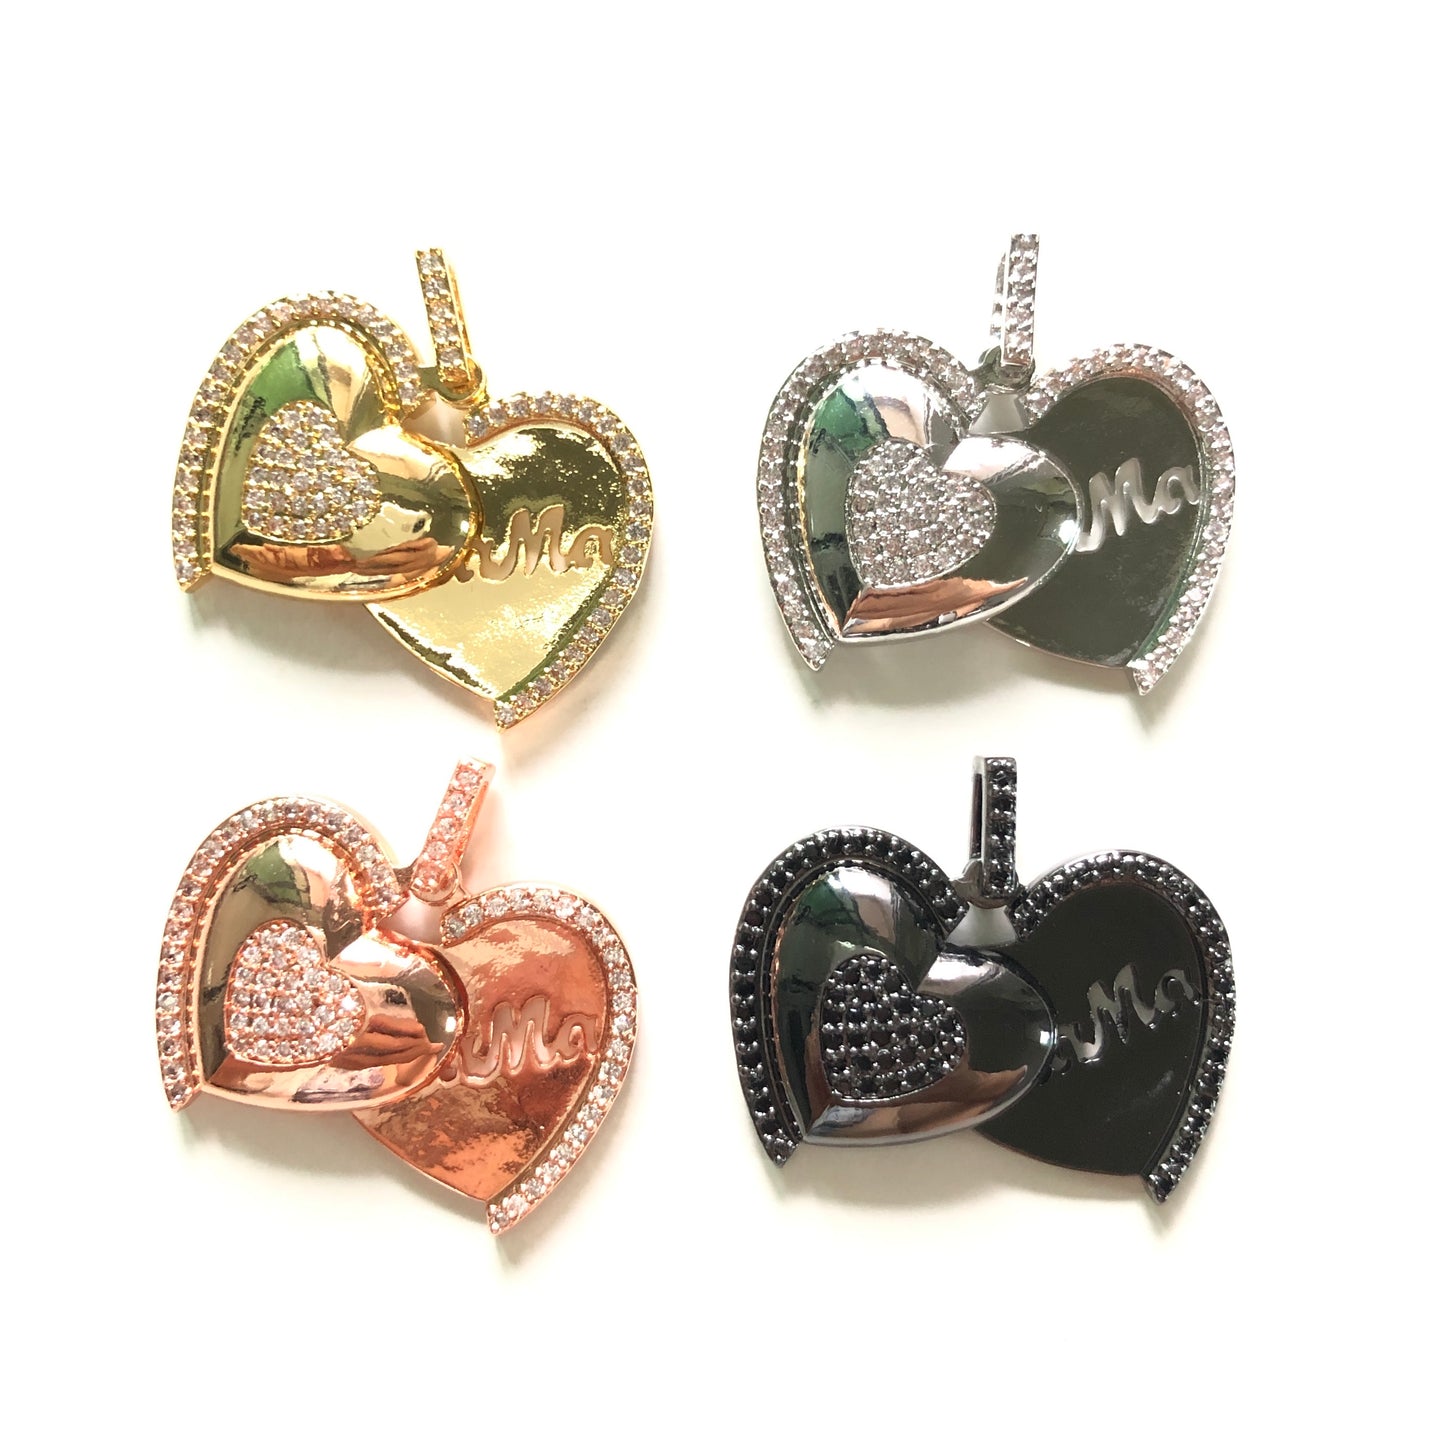 10pcs/lot 27*22mm CZ Paved Mom in Heart 3D Charms CZ Paved Charms Mother's Day On Sale Charms Beads Beyond